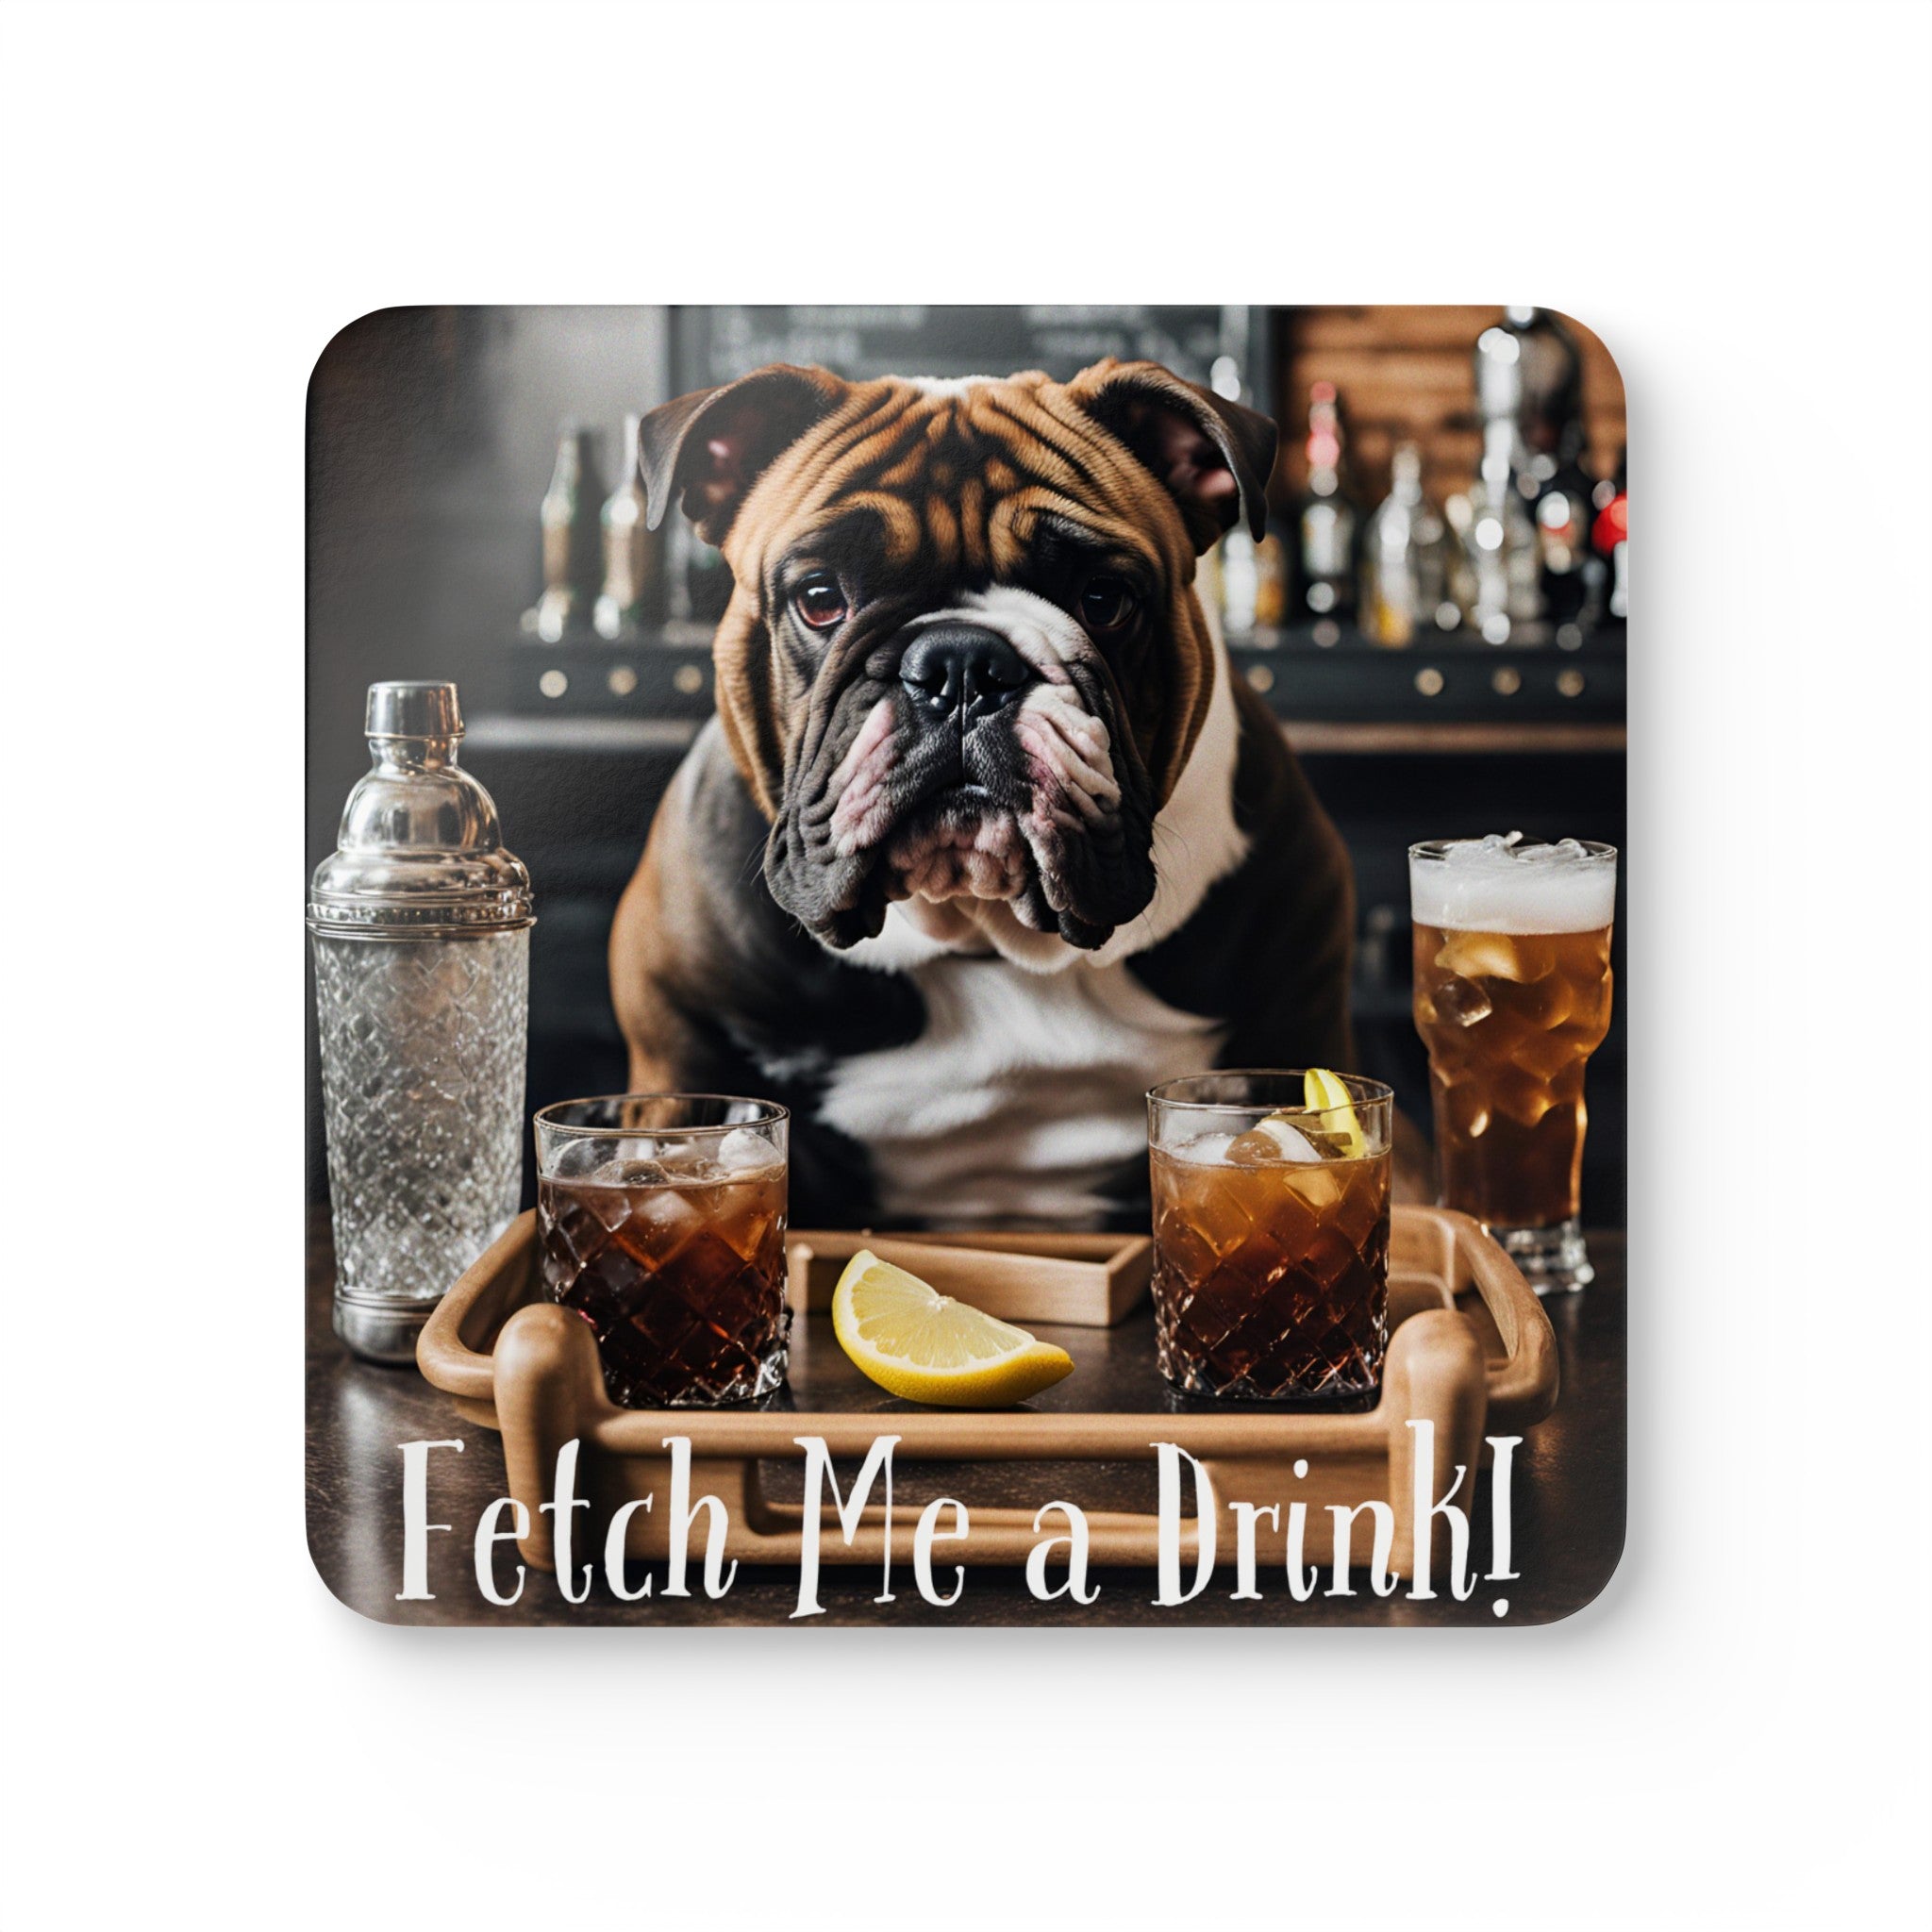 "Fetch Me A Drink" set of 4 coasters (Brown/English)